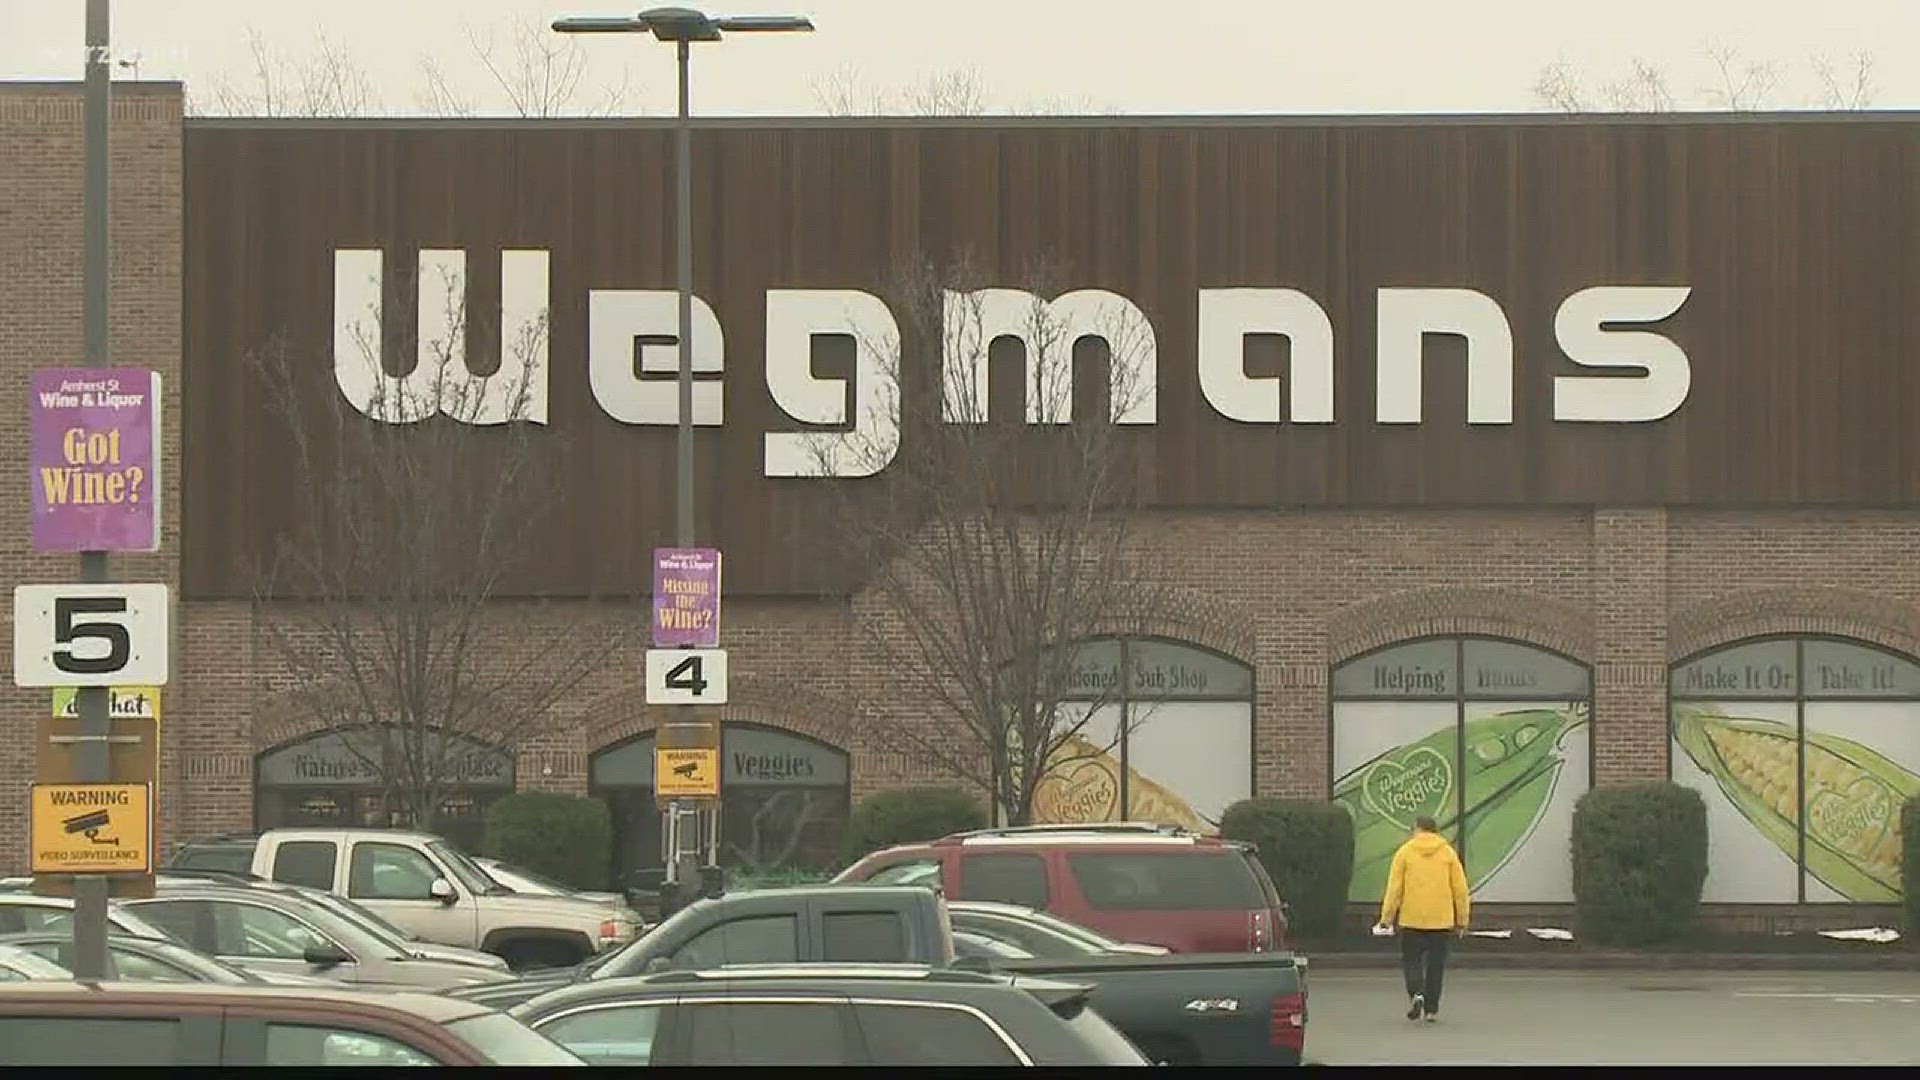 Fortune magazine named Wegmans #2 on their annual list of the best places to work.